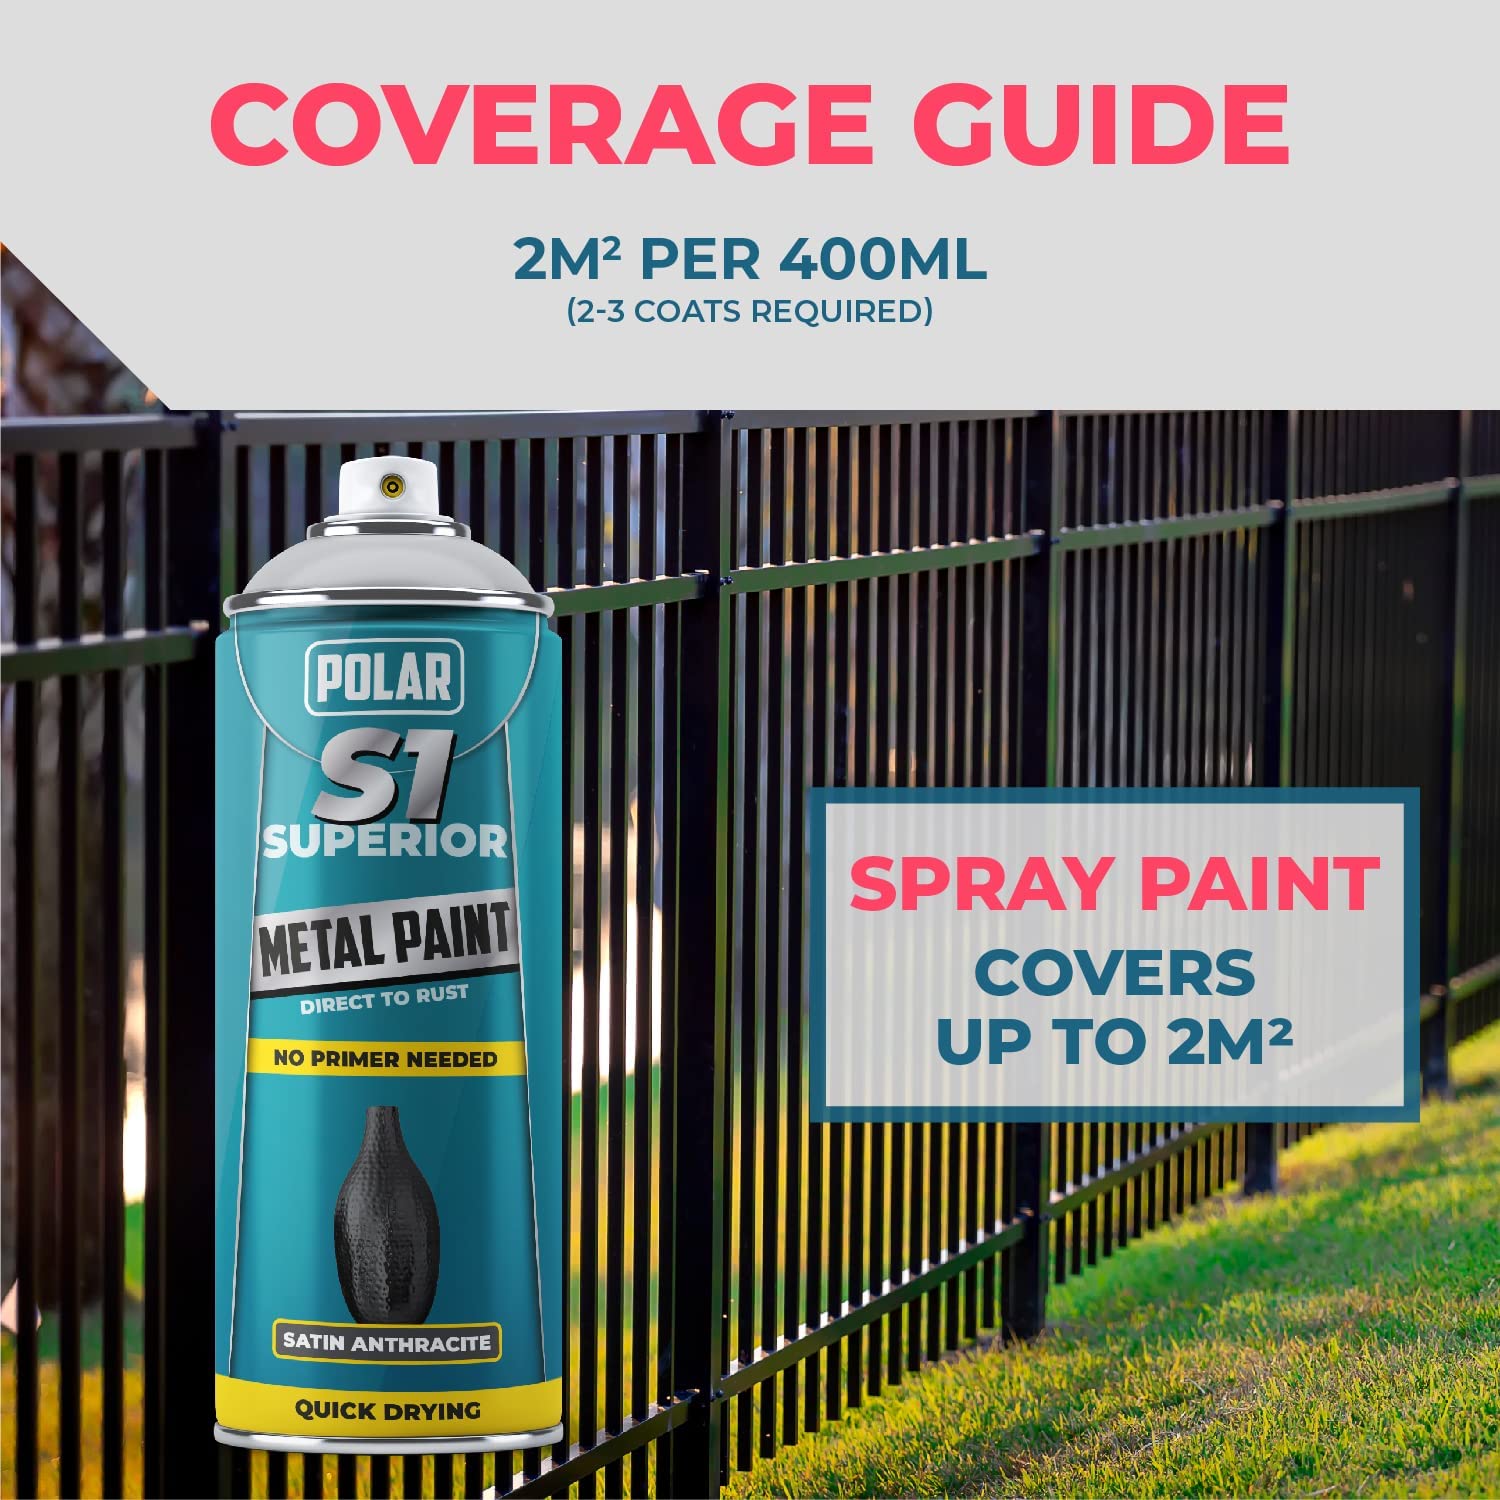 Polar Direct to Rust Satin Black Metal Spray Paint - 2 x 400ml (also available in alternative colours) guide